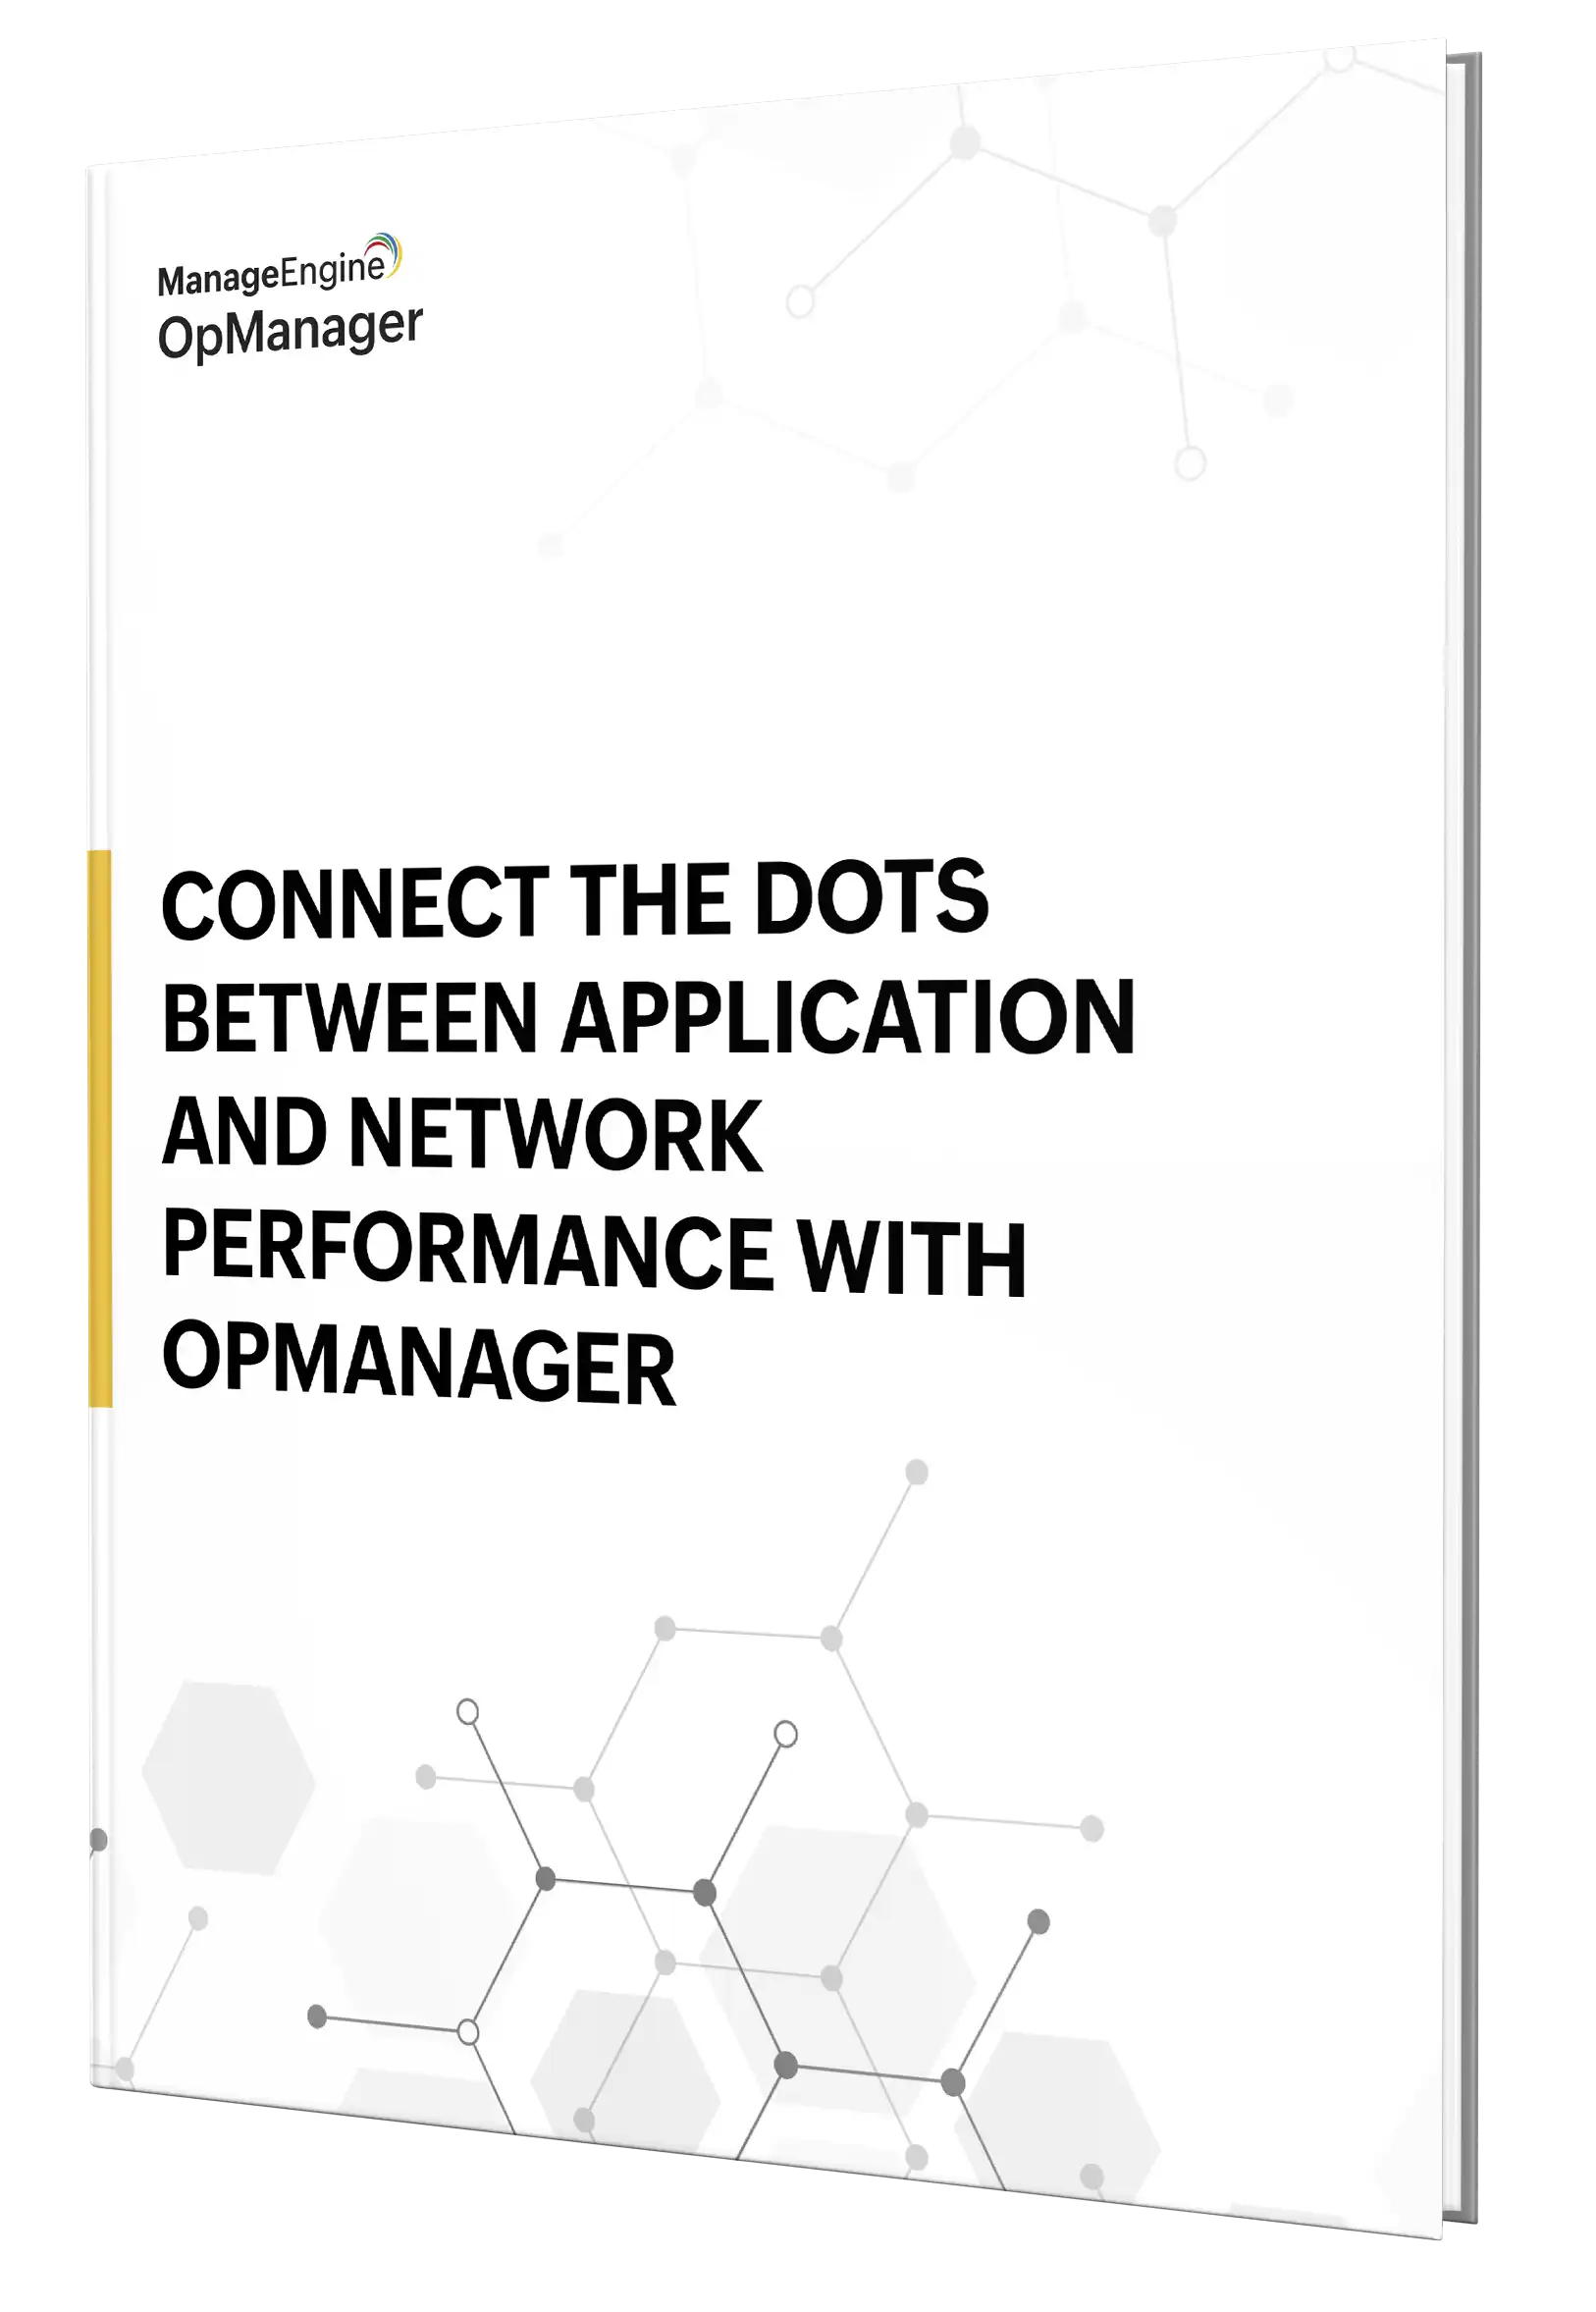 Connect the dots between Application and Network Performance with OpManager